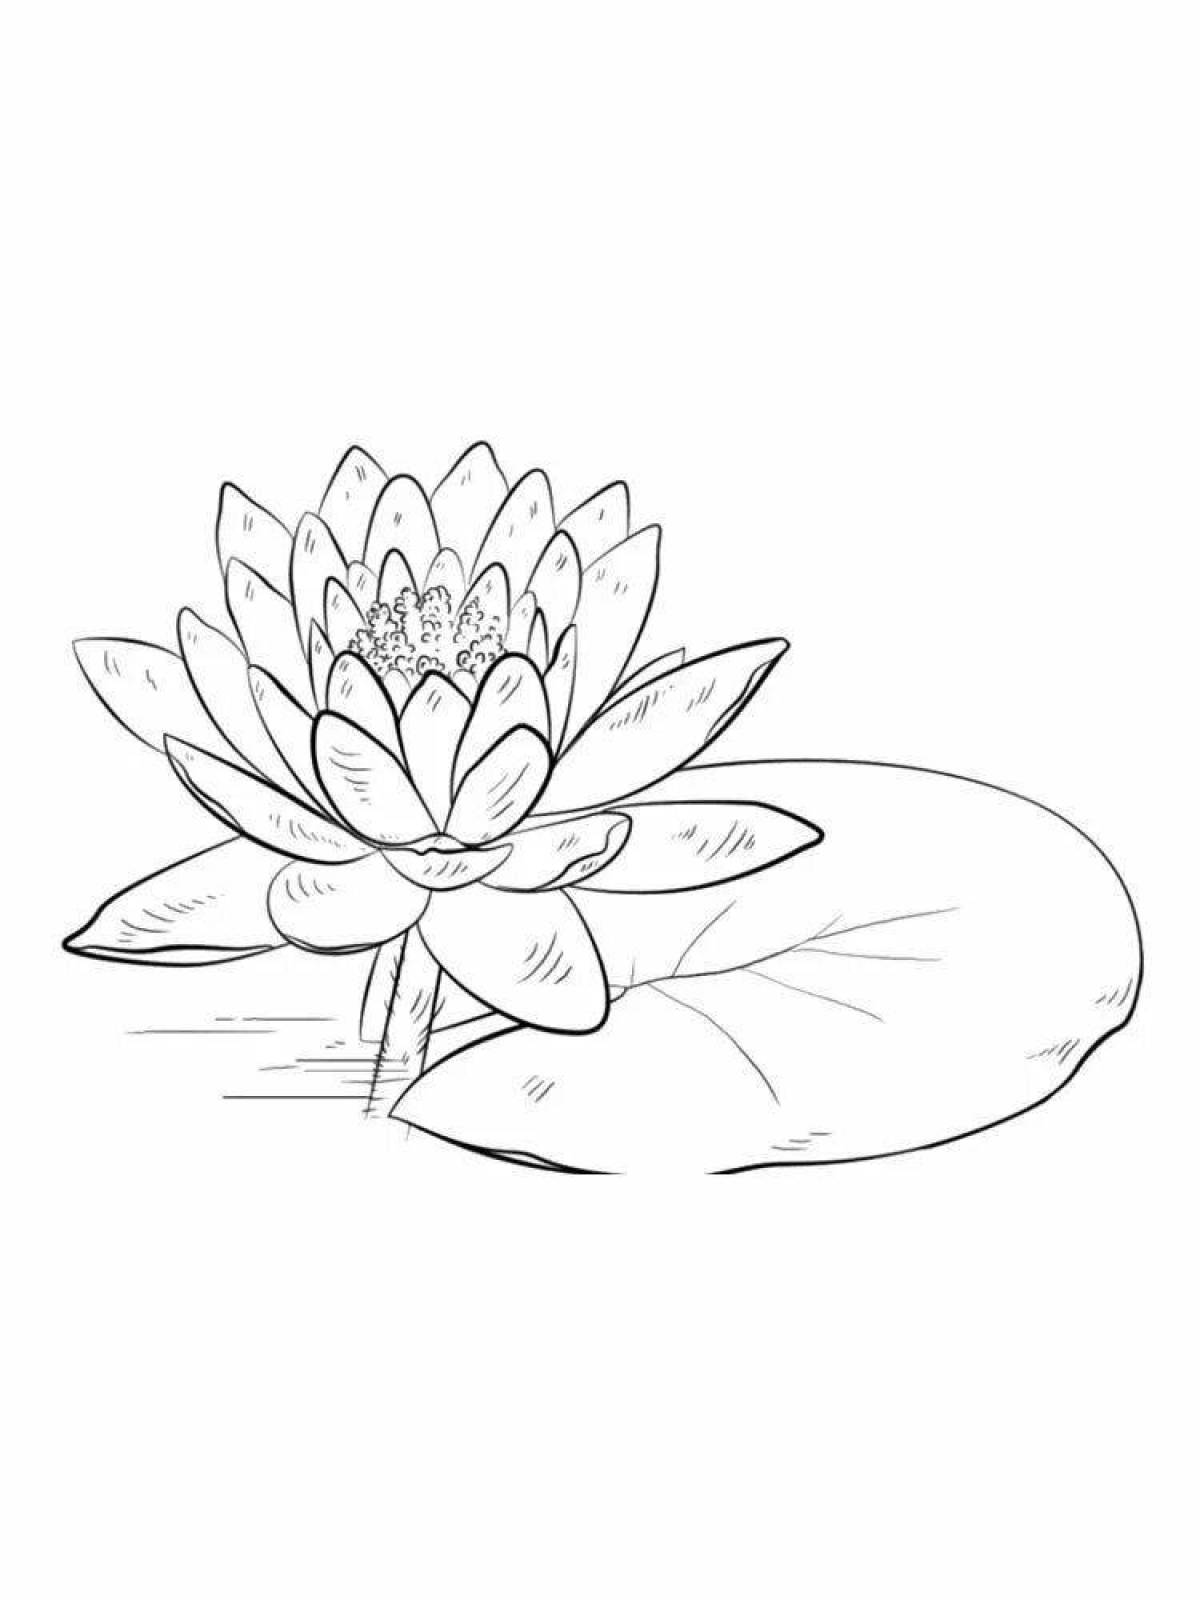 Coloring page graceful water lily